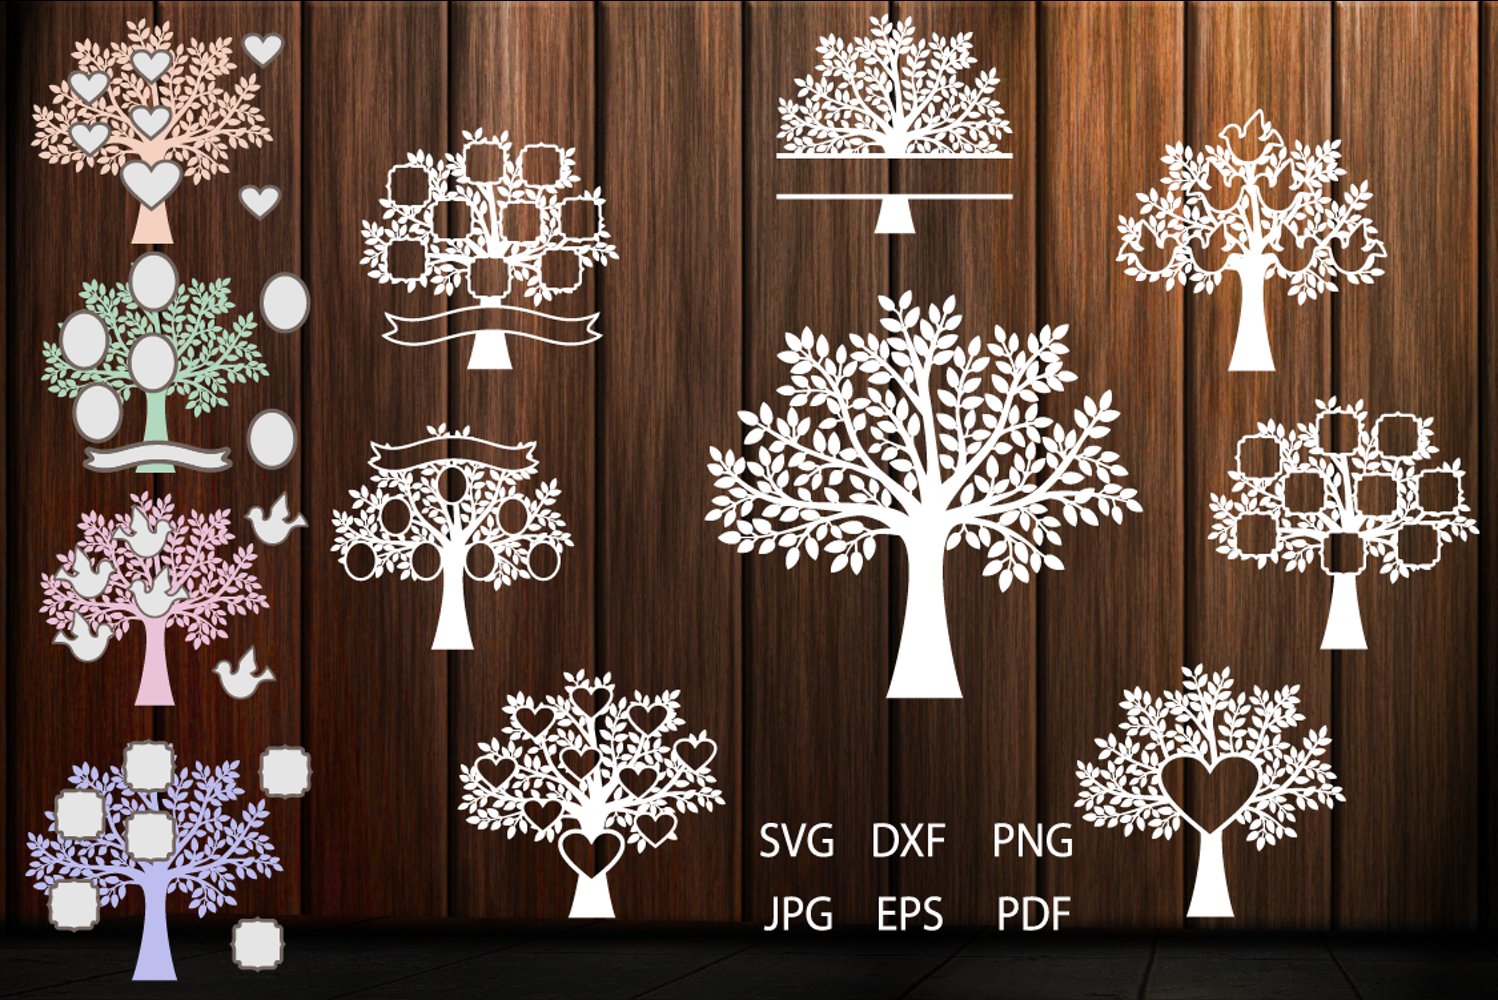 Family Trees in white color on brown background.